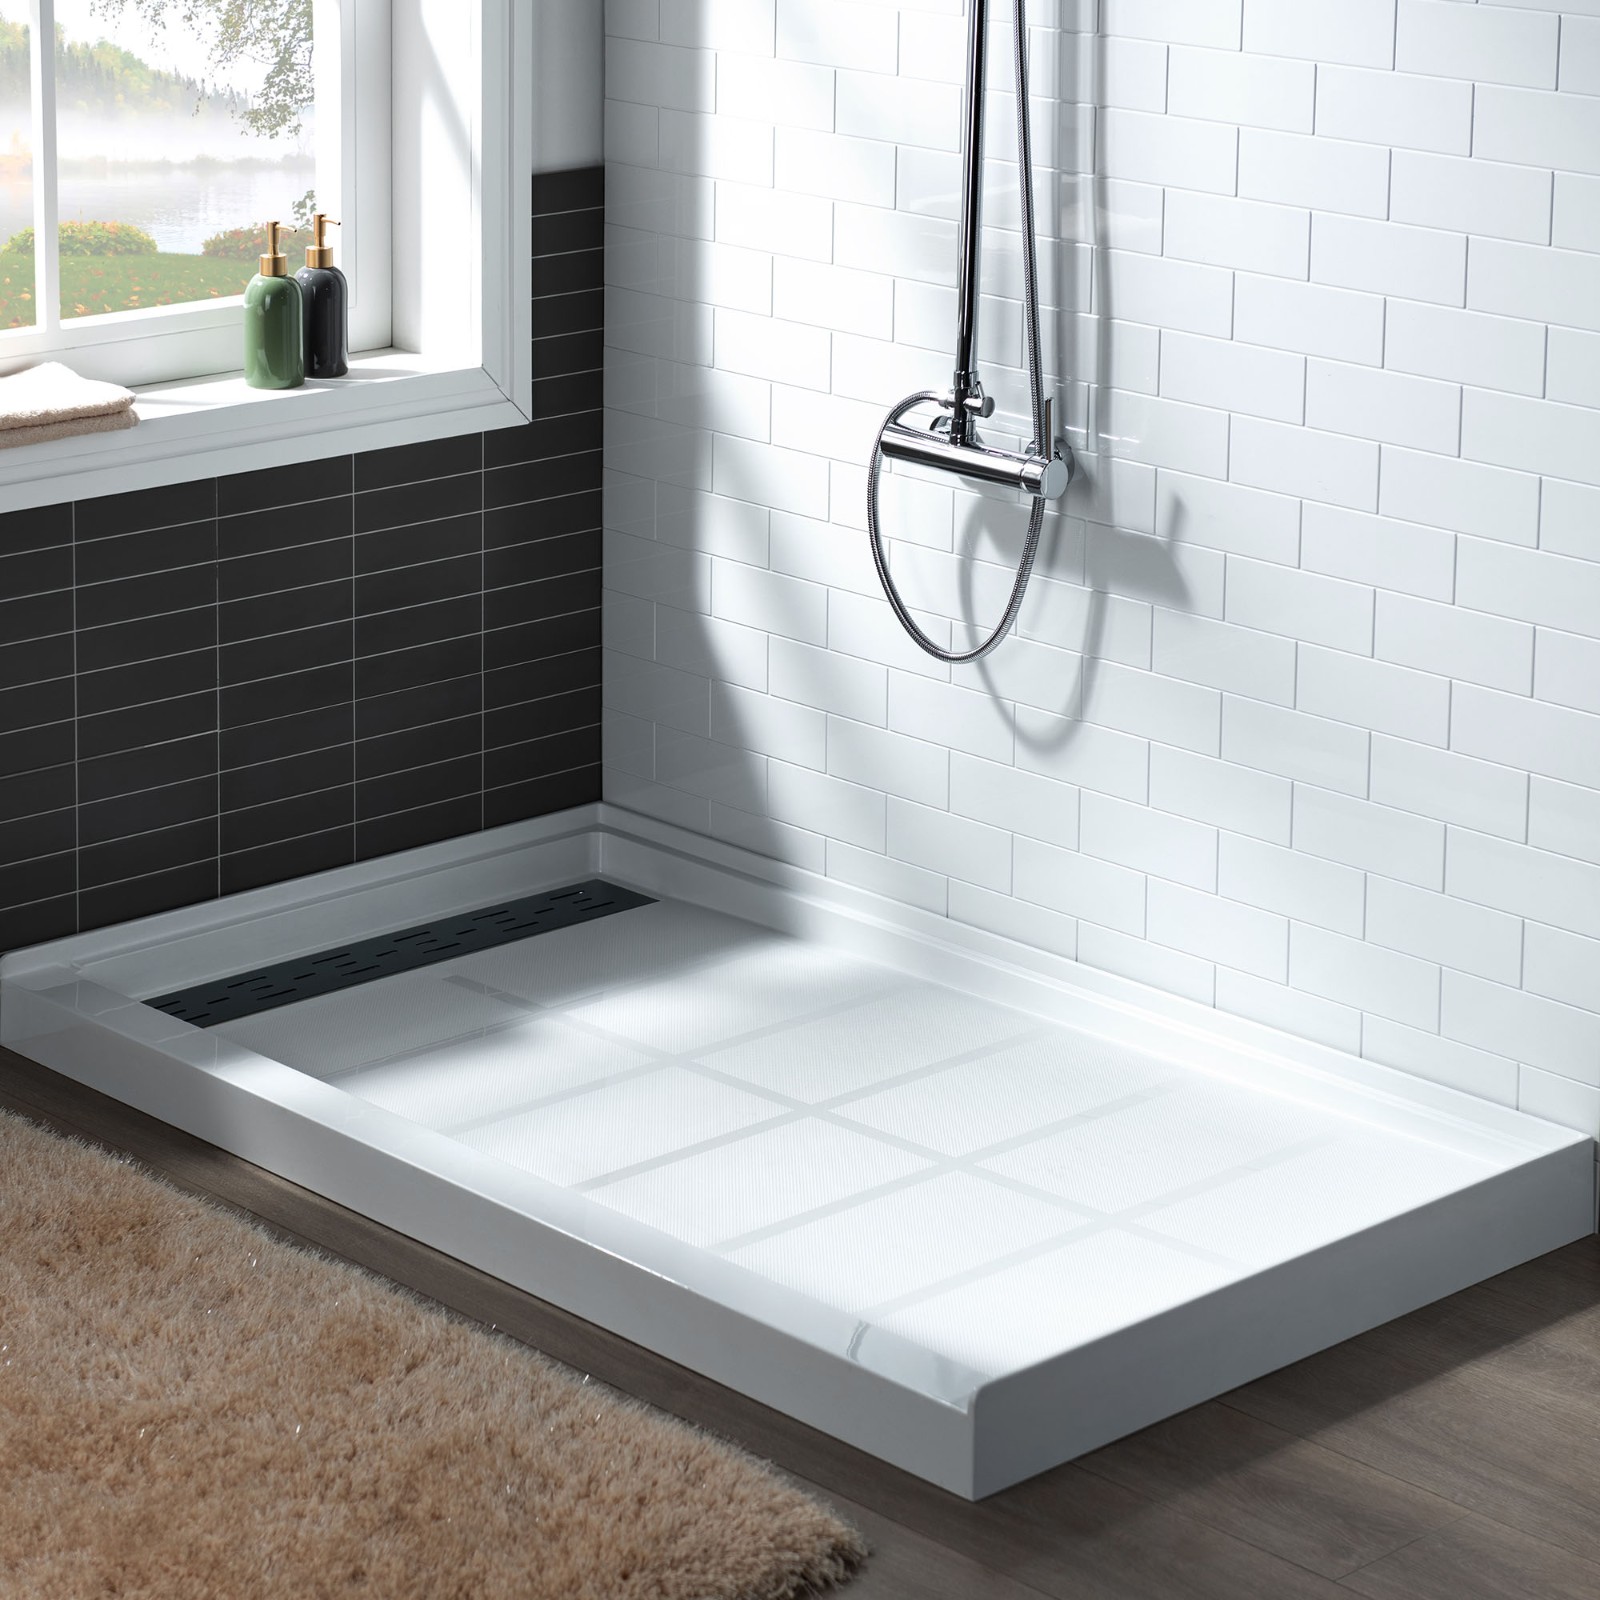  WOODBRIDGE SBR6032-1000L-MB SolidSurface Shower Base with Recessed Trench Side Including Matte Black Linear Cover, 60